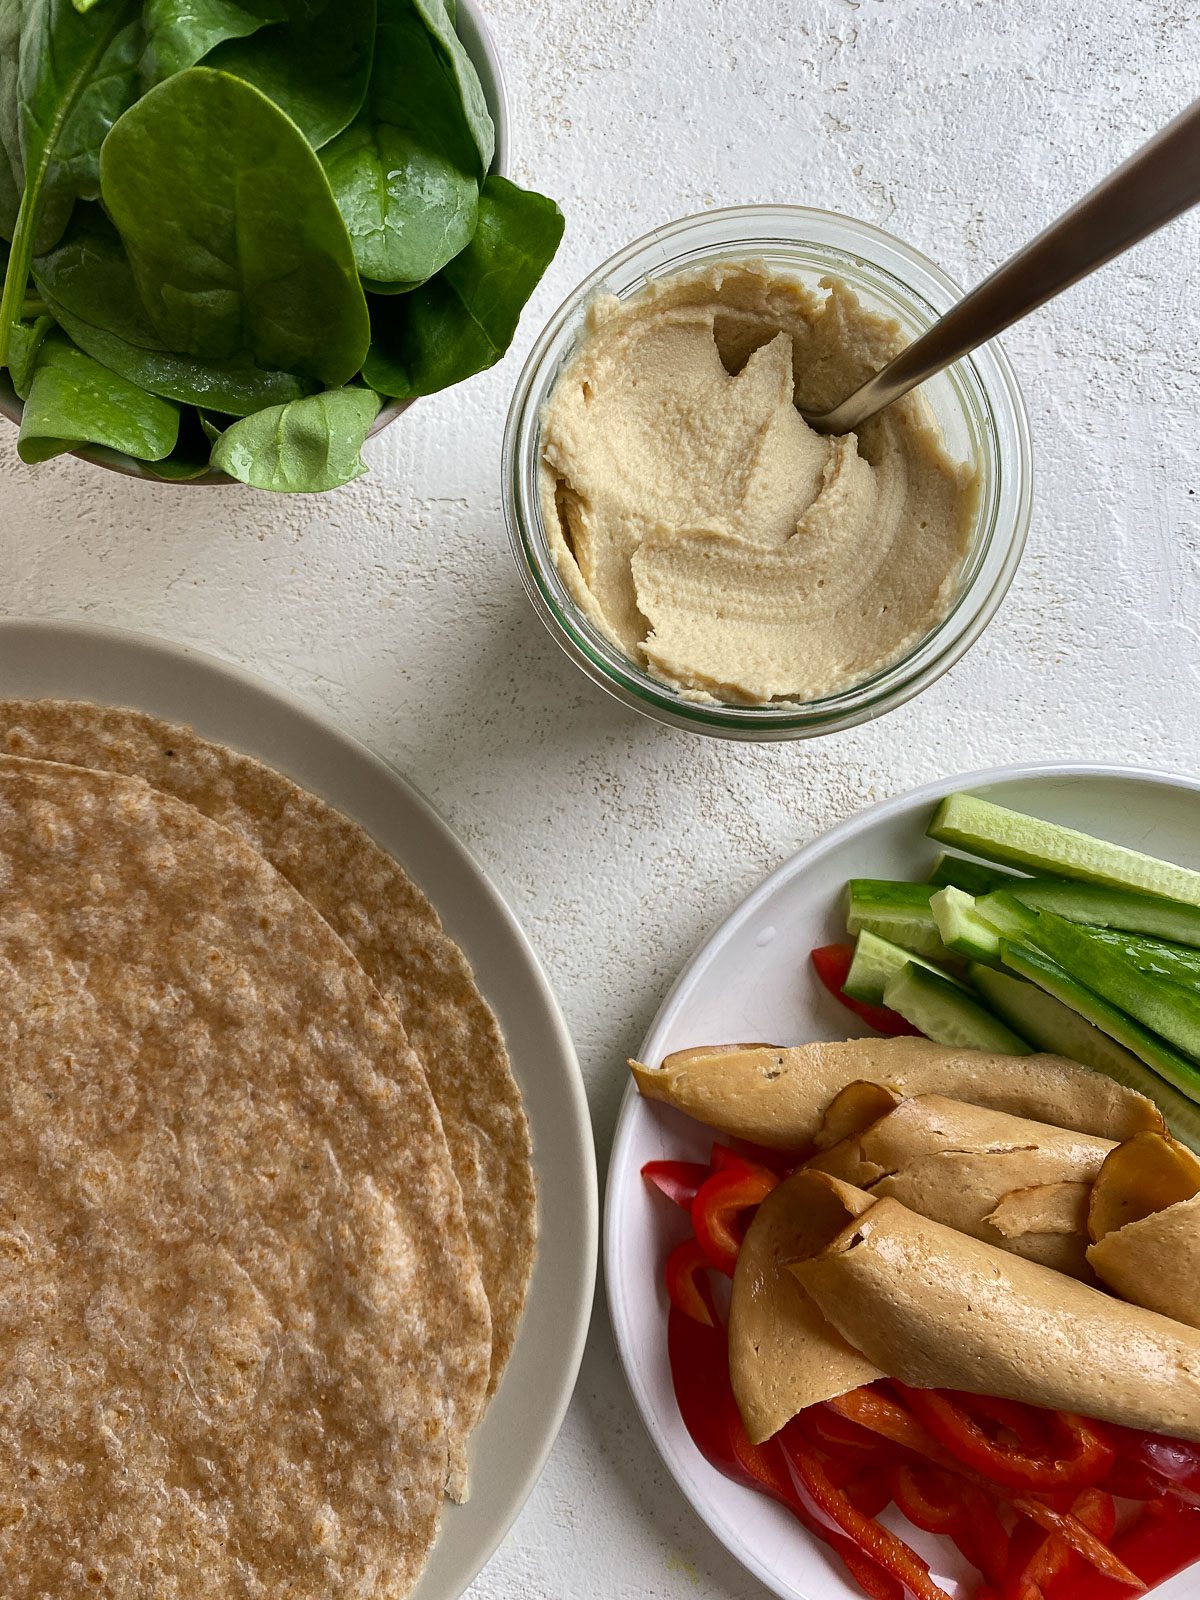 ingredients for Vegan Hummus Wrap against a light surface